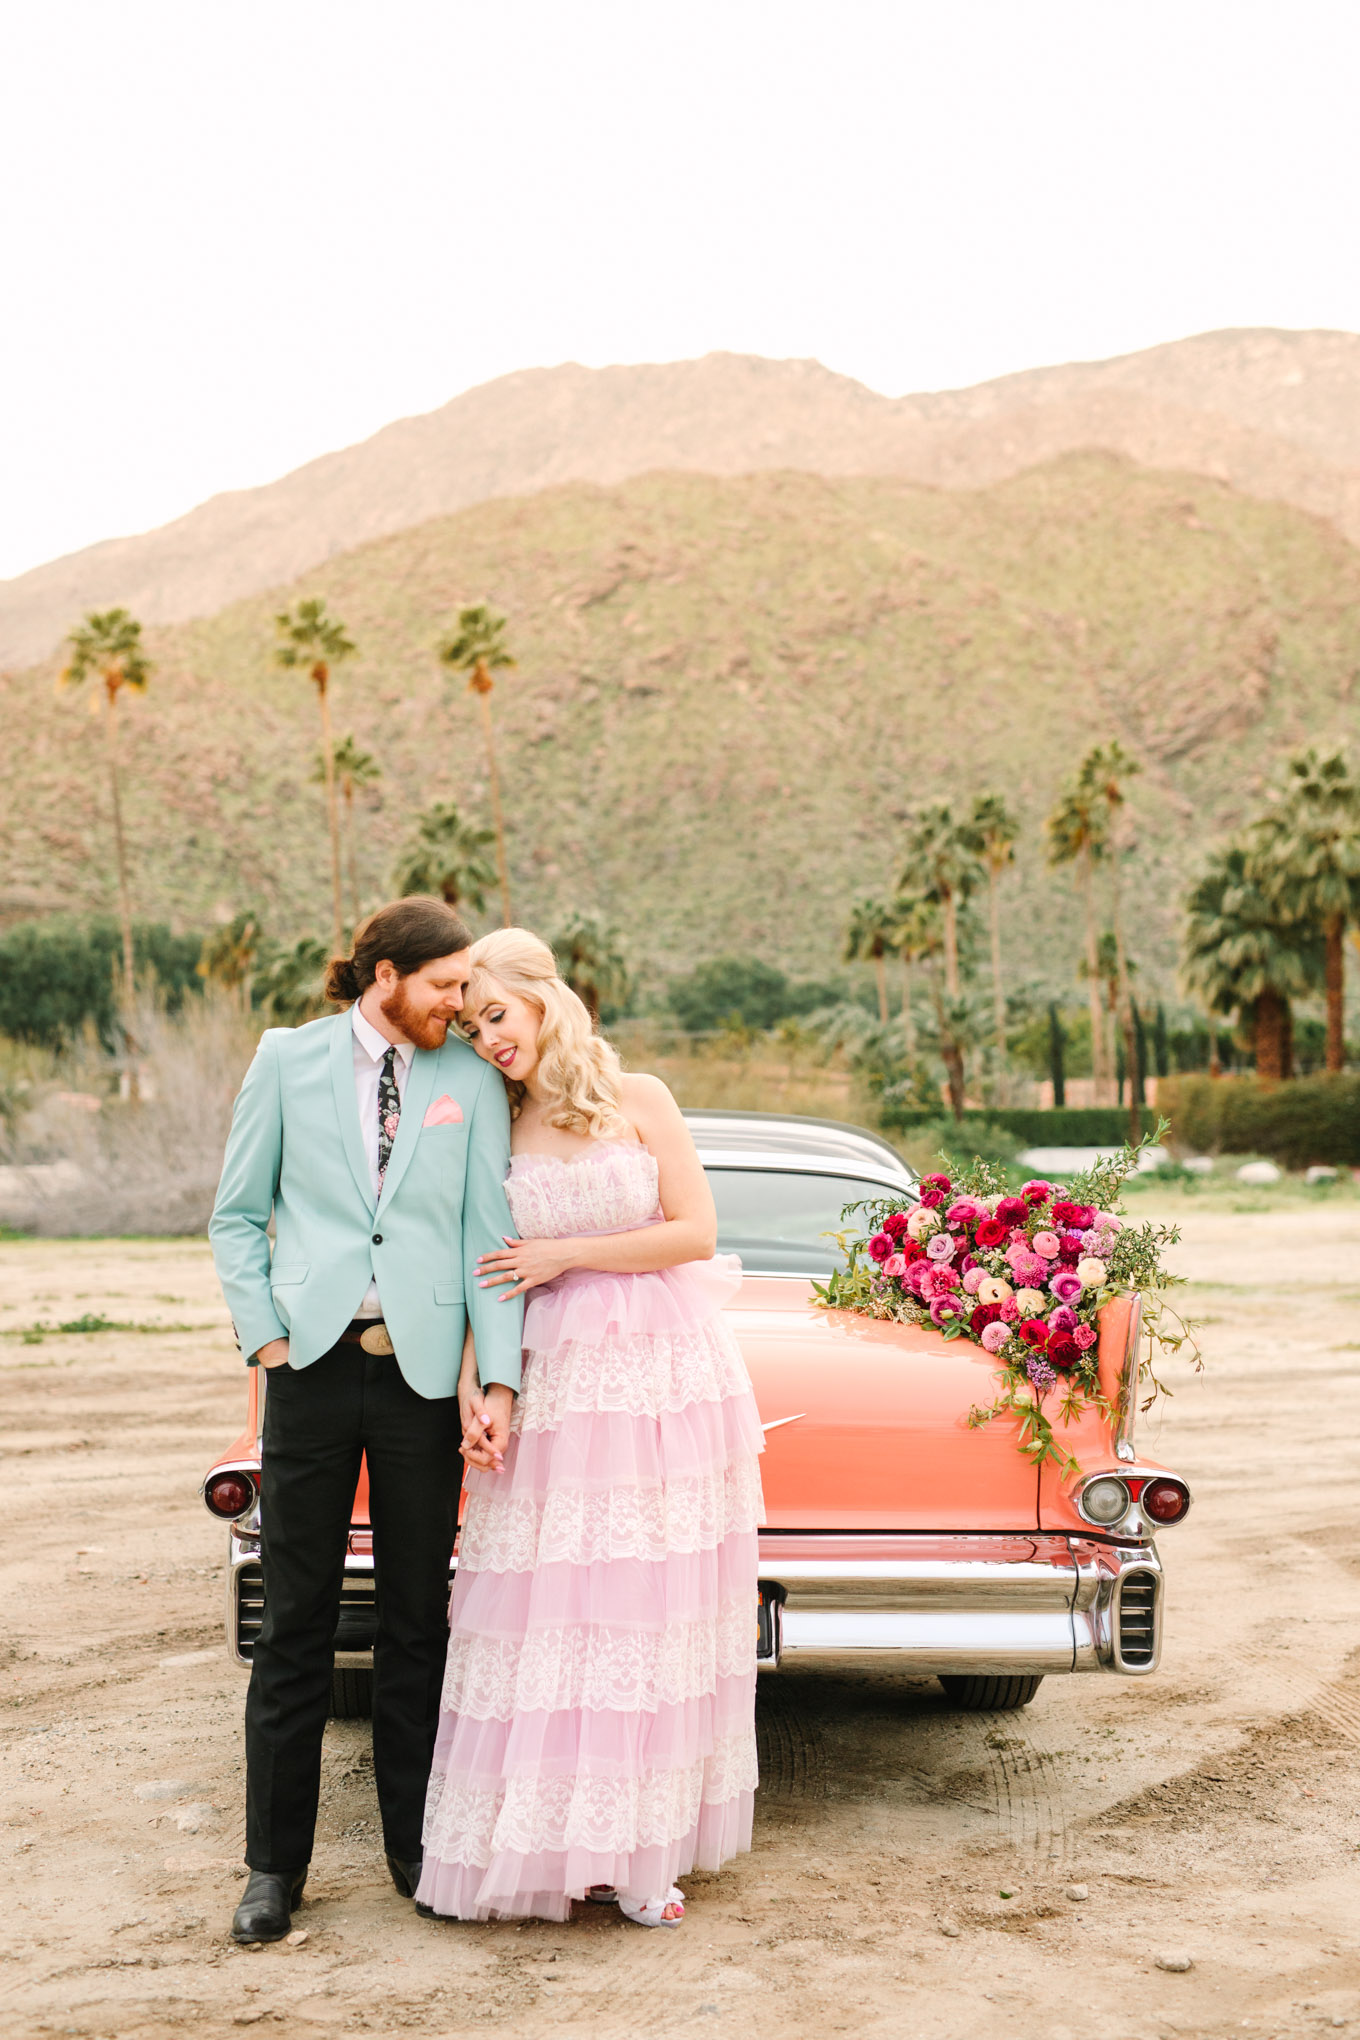 Bride and groom with classic car. Modern vintage-inspired Palm Springs engagement session with a 1960s pink Cadillac, retro clothing, and flowers by Shindig Chic. | Colorful and elevated wedding inspiration for fun-loving couples in Southern California | #engagementsession #PalmSpringsengagement #vintageweddingdress #floralcar #pinkcar   Source: Mary Costa Photography | Los Angeles